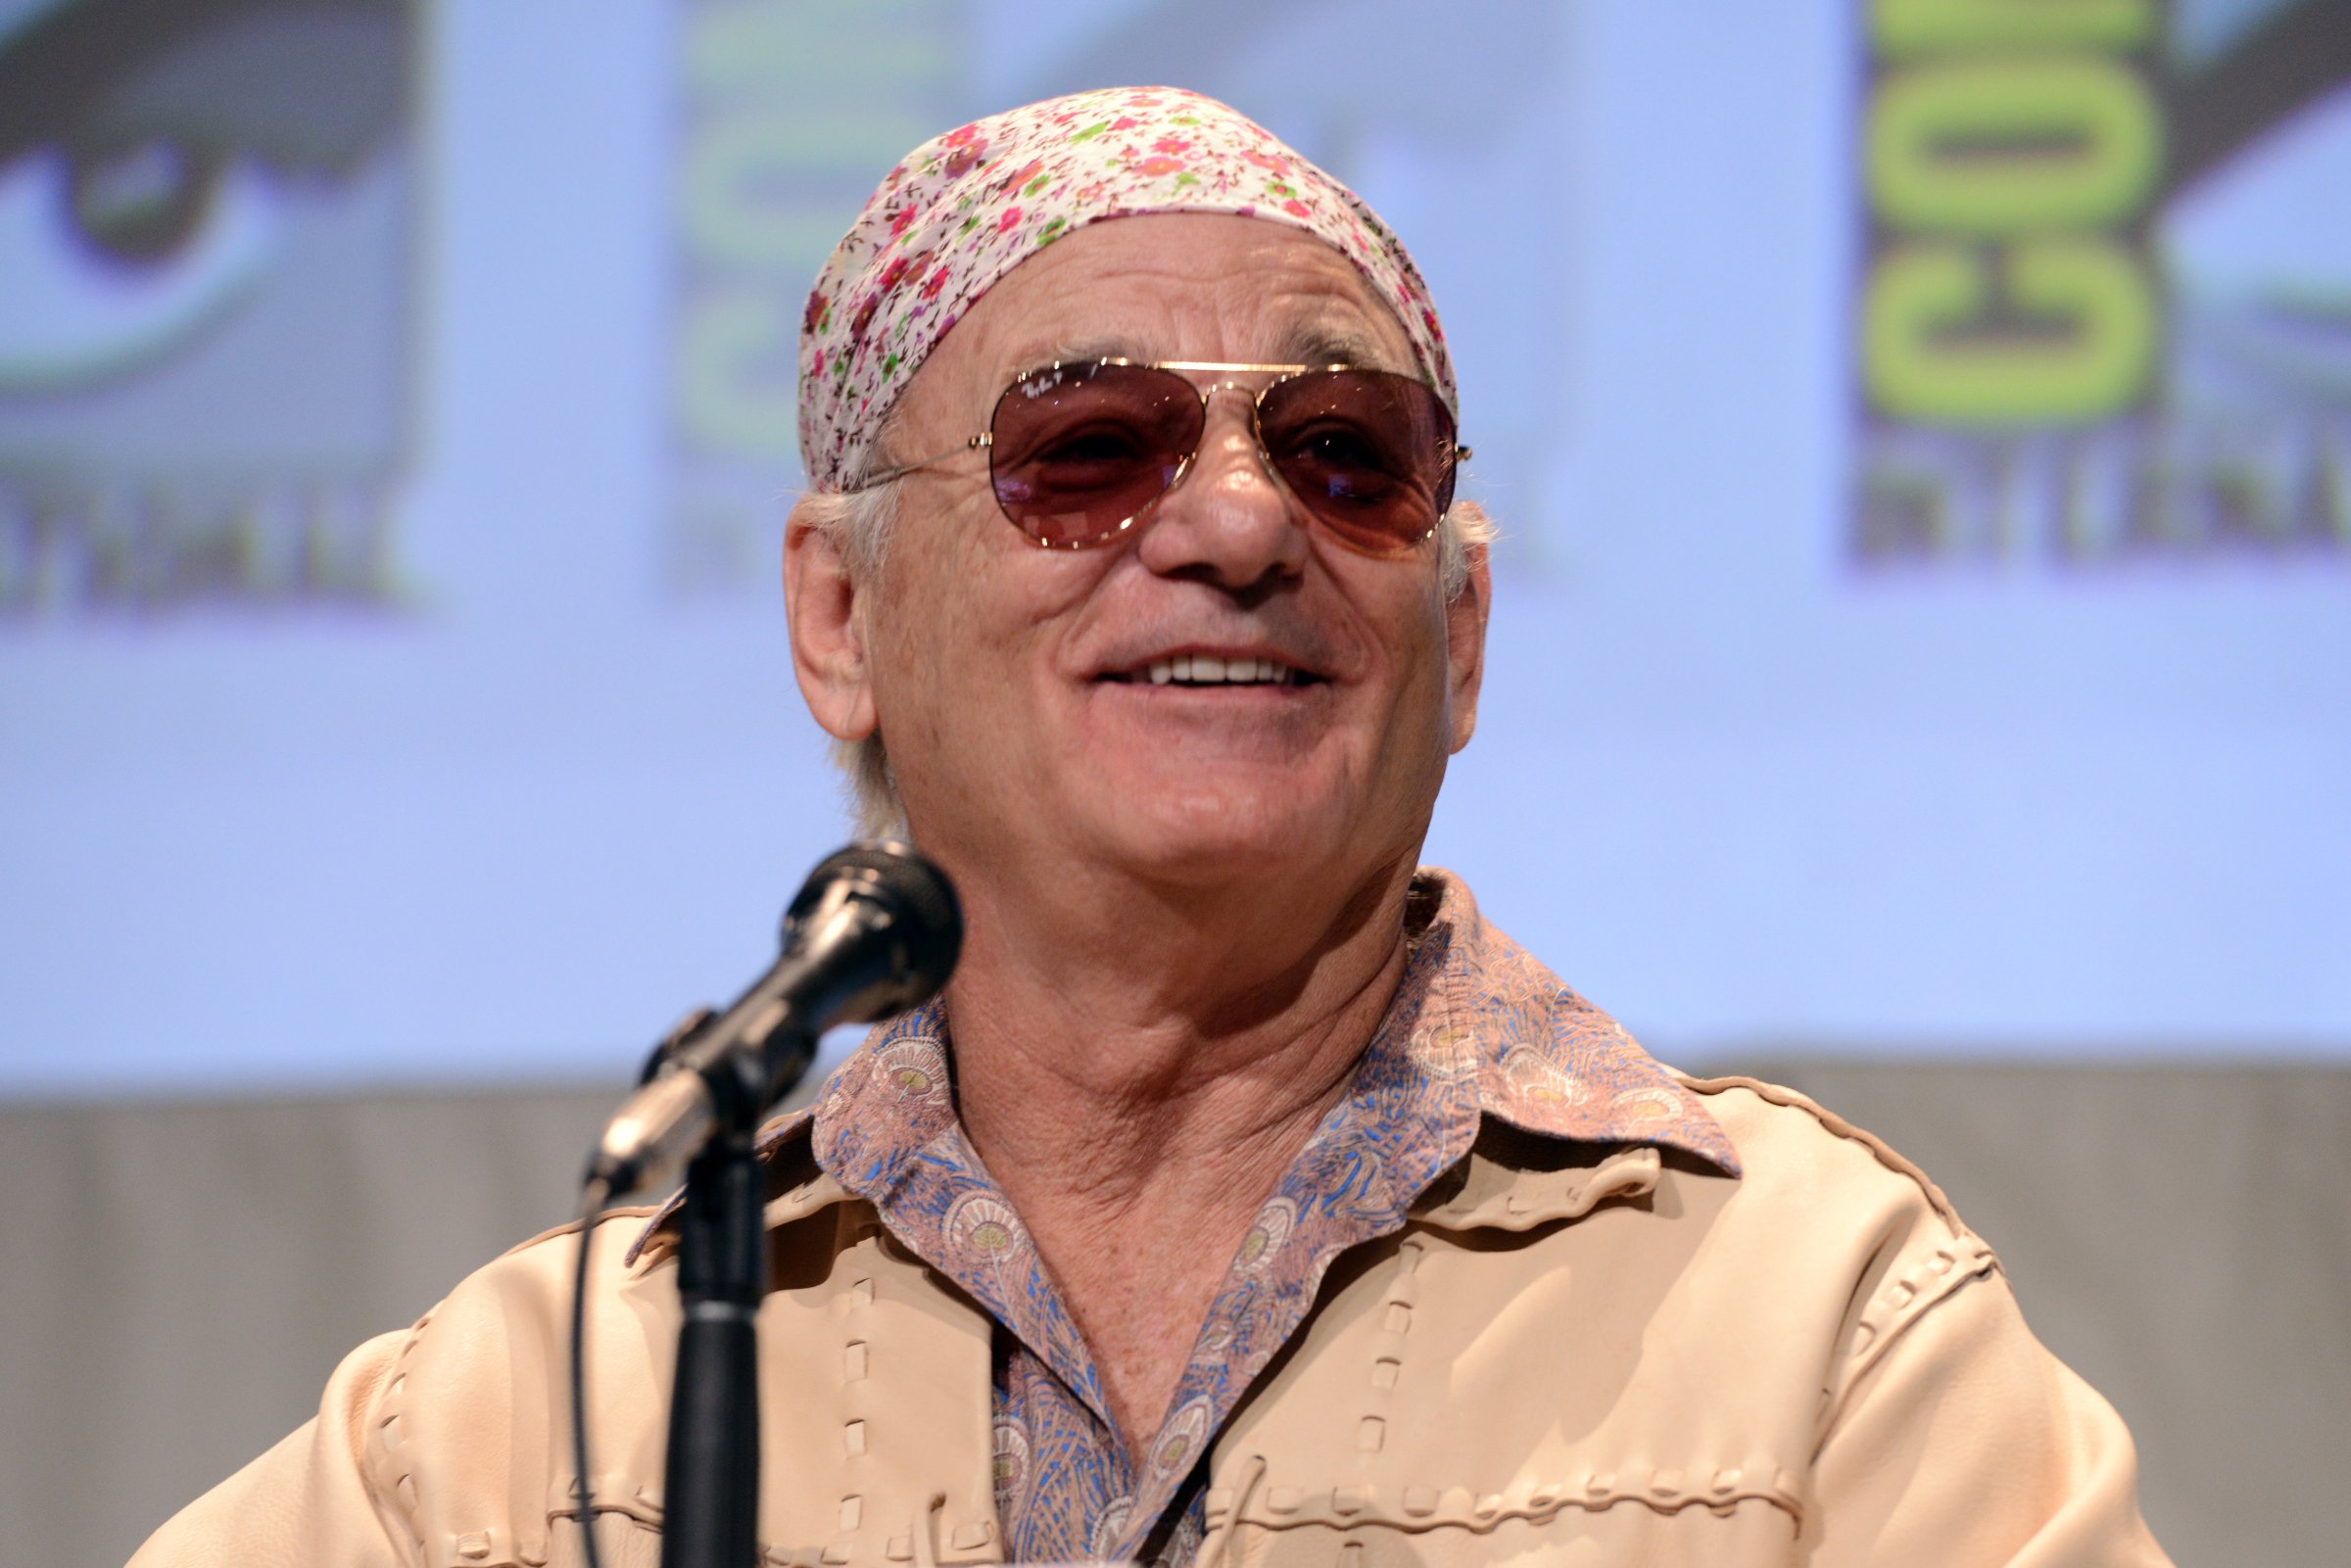 Bill Murray speaks at Comic-Con International 2015 in San Diego on July 9, 2015.